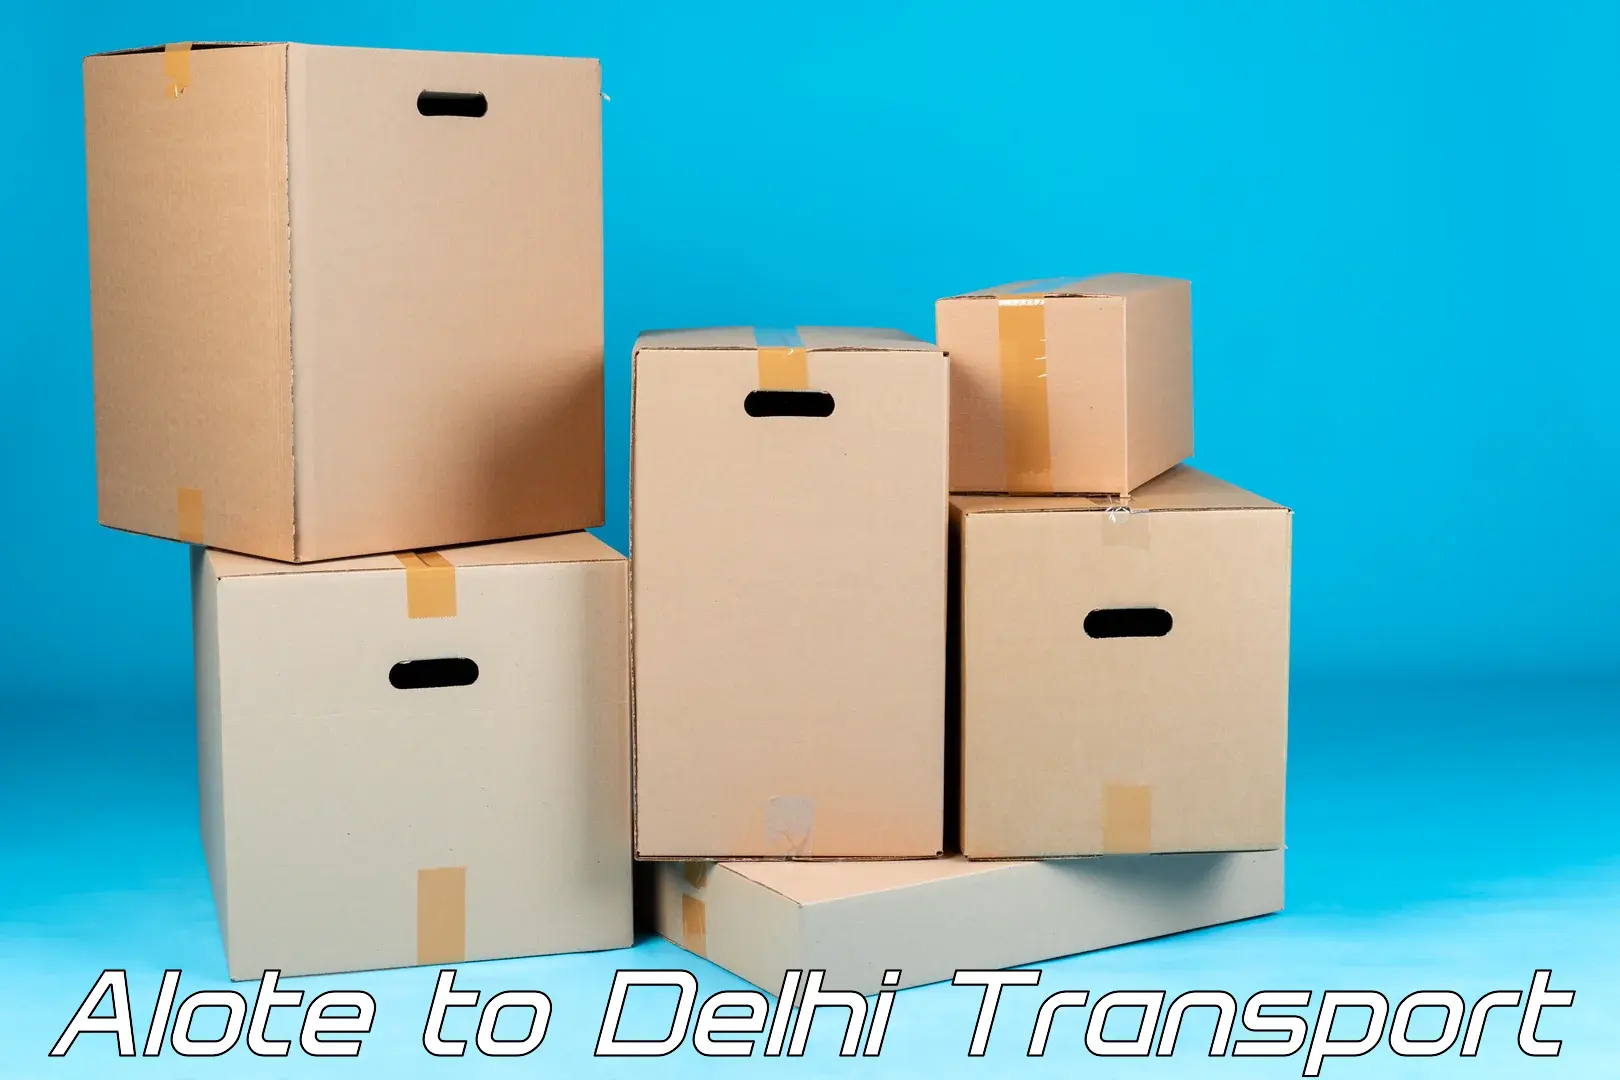 Goods transport services Alote to Lodhi Road